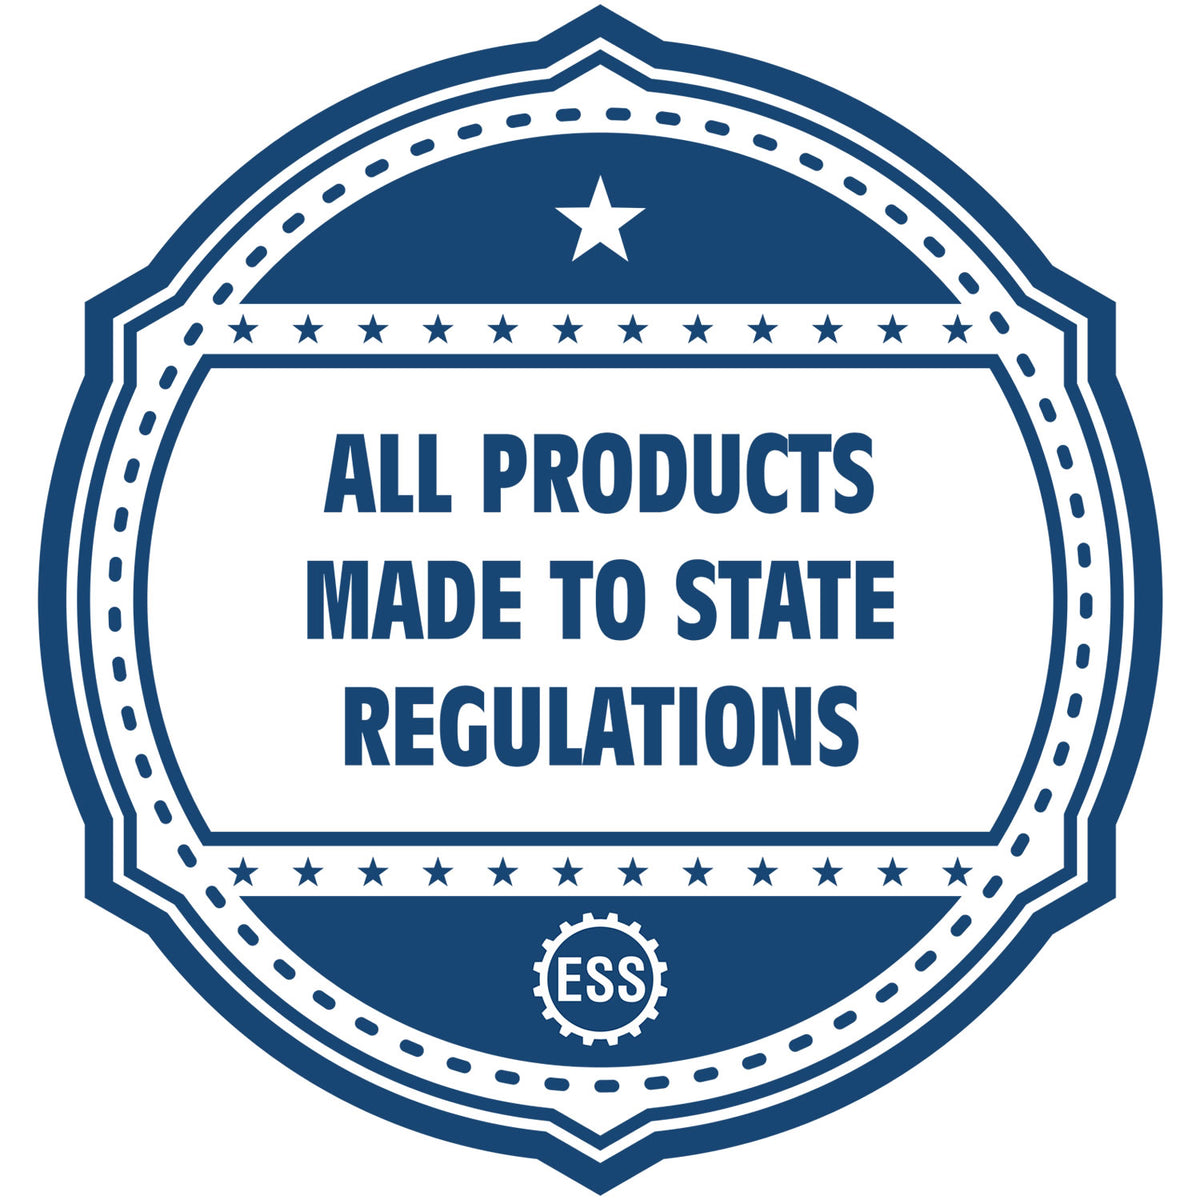 An icon or badge element for the Virginia Desk Architect Embossing Seal showing that this product is made in compliance with state regulations.